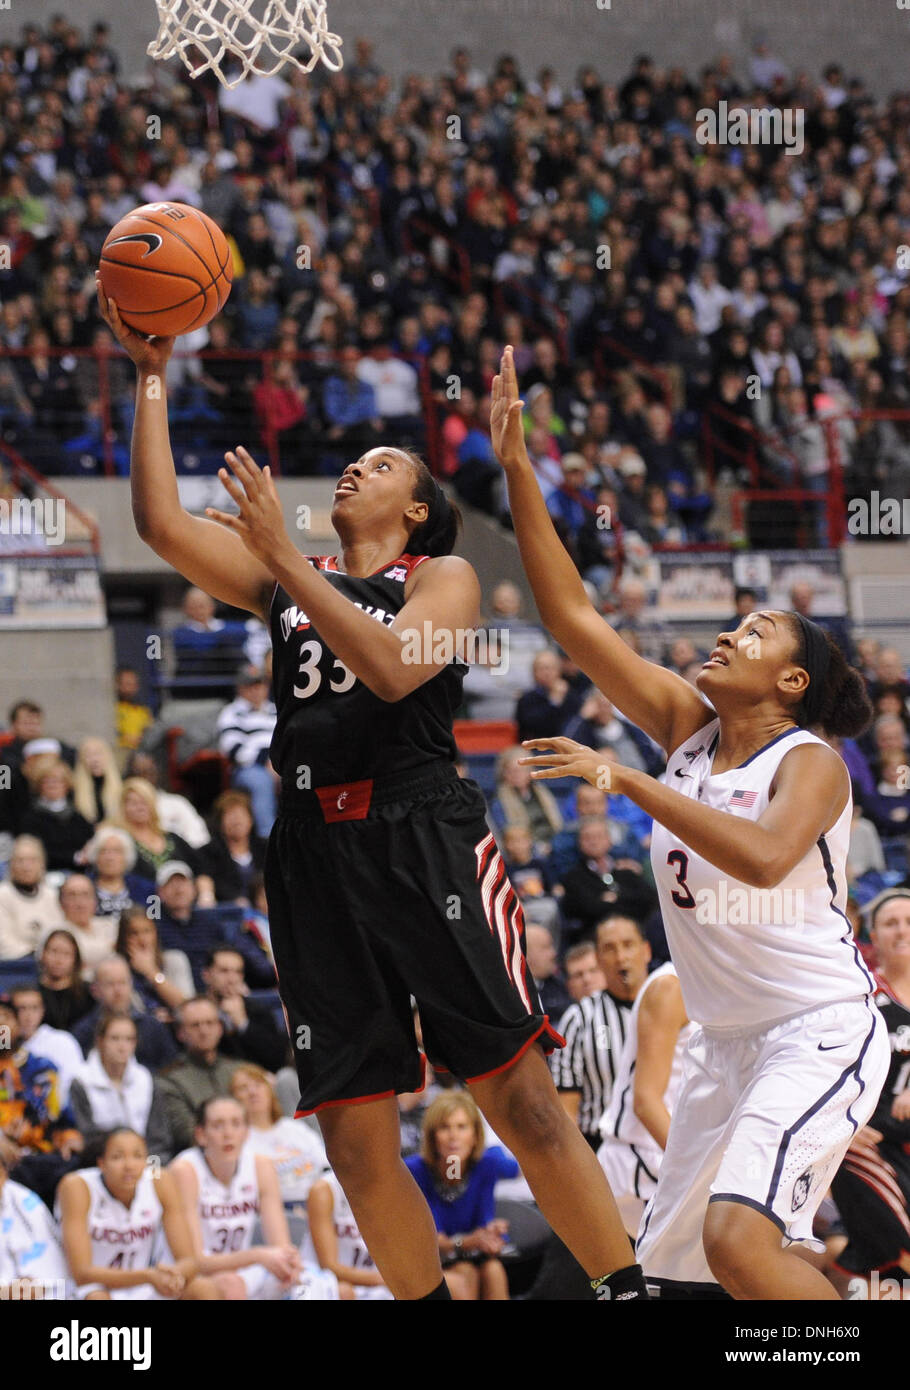 Storrs, CT, USA. 29th Dec, 2013. Sunday December 29, 2013: Cincinnati Bearcats forward Jeanise Randolph (33) goes to the basket in front of UConn huskies guard-forward Morgan Tuck (3) during the 1st half of the womens NCAA basketball game between Cincinnati and Connecticut at Gampel Pavilion in Storrs, CT. Bill Shettle / Cal Sport Media. © csm/Alamy Live News Stock Photo